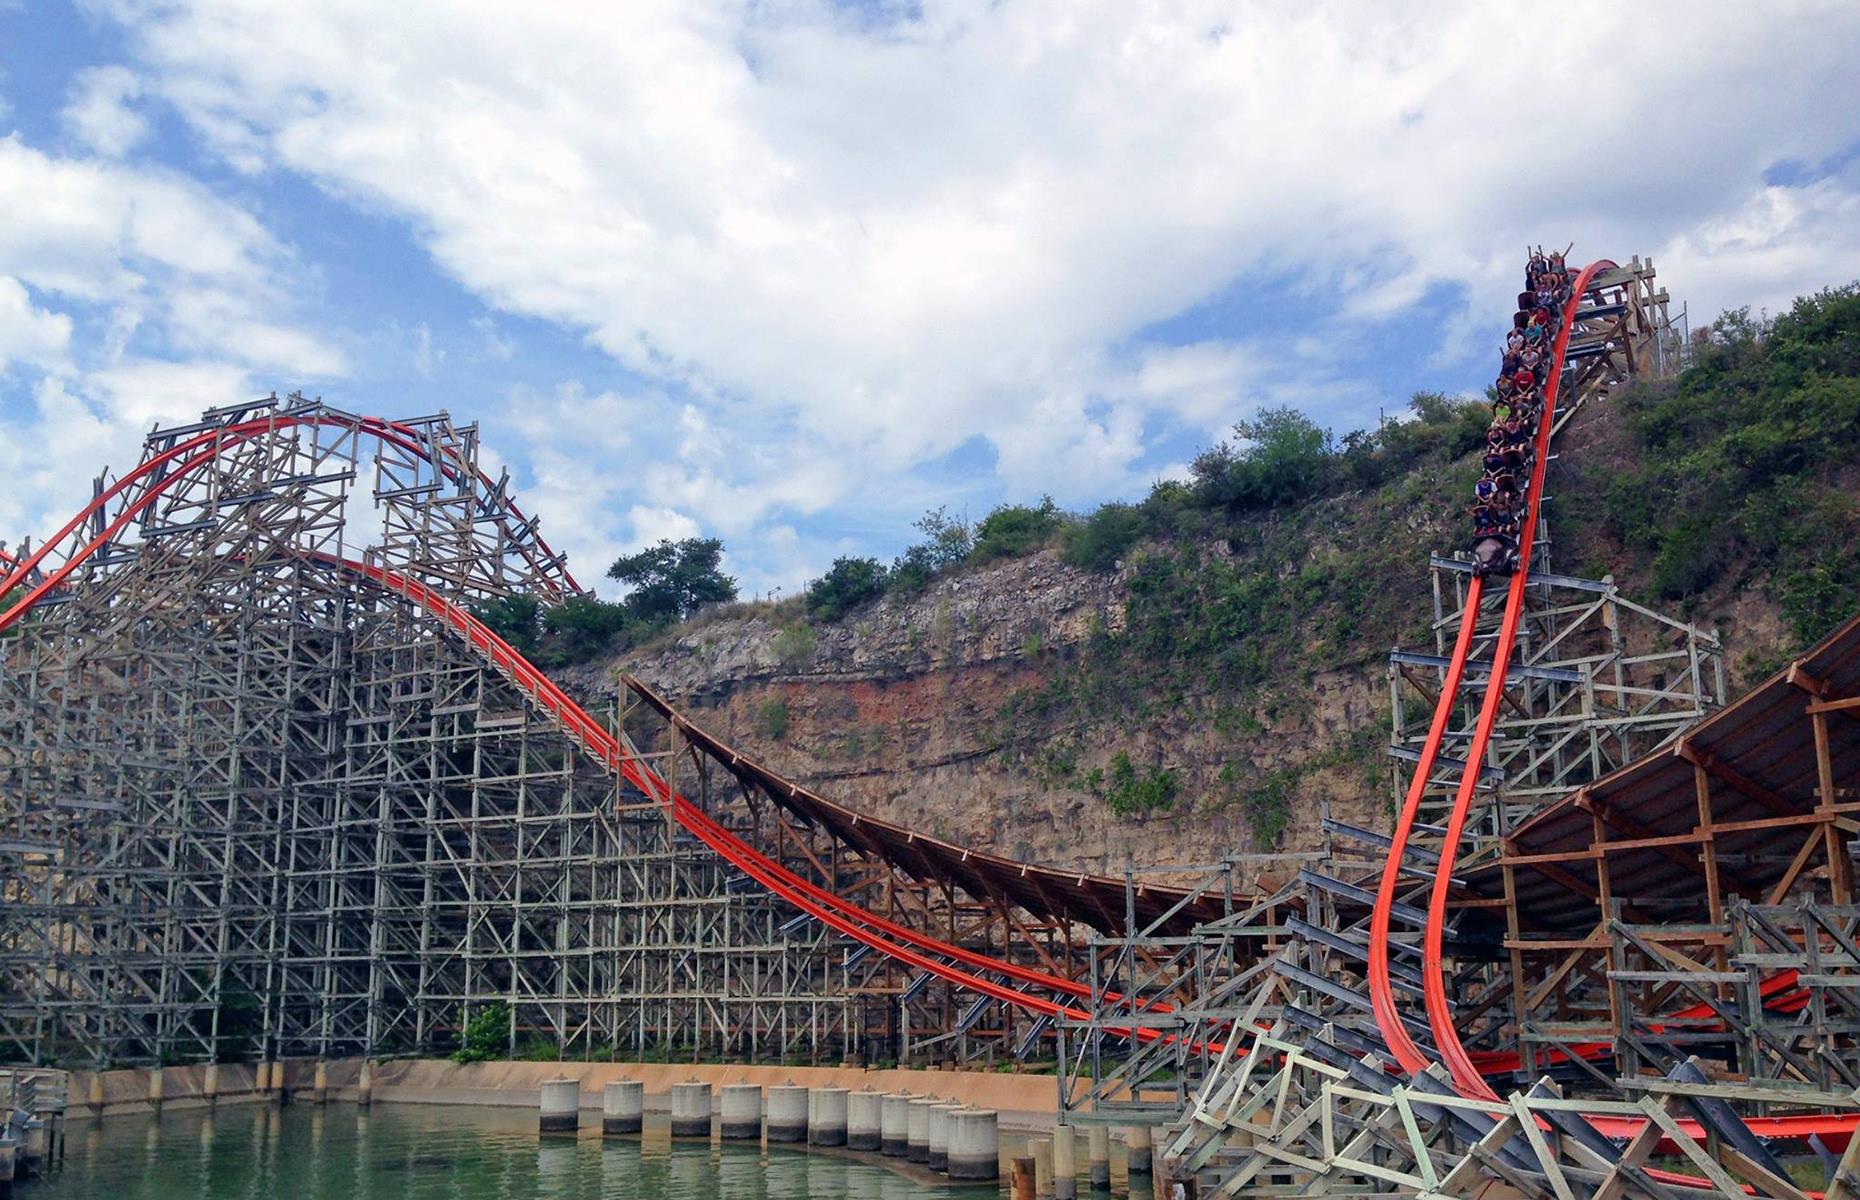 <p><a href="https://www.sixflags.com/fiestatexas">Six Flags Fiesta Texas'</a> wood-steel hybrid roller coaster is stomach-churningly good with a satisfying series of speed-filled twists and turns. It features a whopping 171-feet-tall (52m) drop which is taken at an 81-degree angle, four steep overbanked turns and an inverted barrel roll. And that’s all taken at fierce speeds of up to 70 miles per hour (112.6km/h).</p>  <p><strong><a href="https://www.loveexploring.com/gallerylist/85333/americas-most-jawdropping-roller-coasters-only-for-the-brave">Buckle up and take a look at more of America's most jaw-dropping roller coasters</a></strong></p>